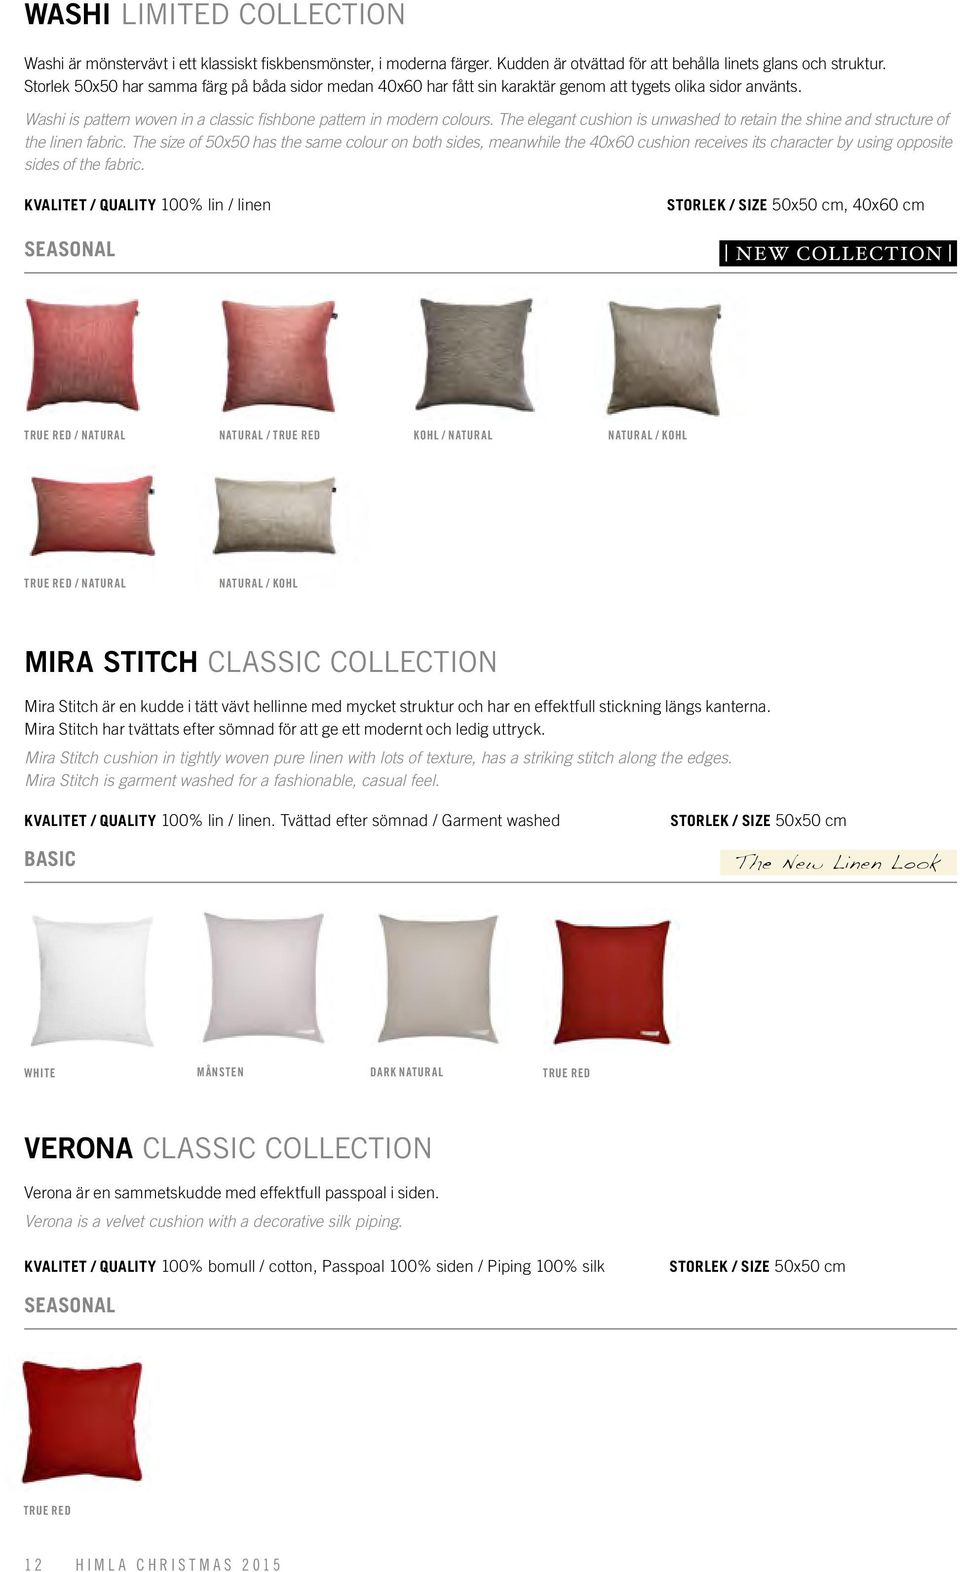 The elegant cushion is unwashed to retain the shine and structure of the linen fabric.